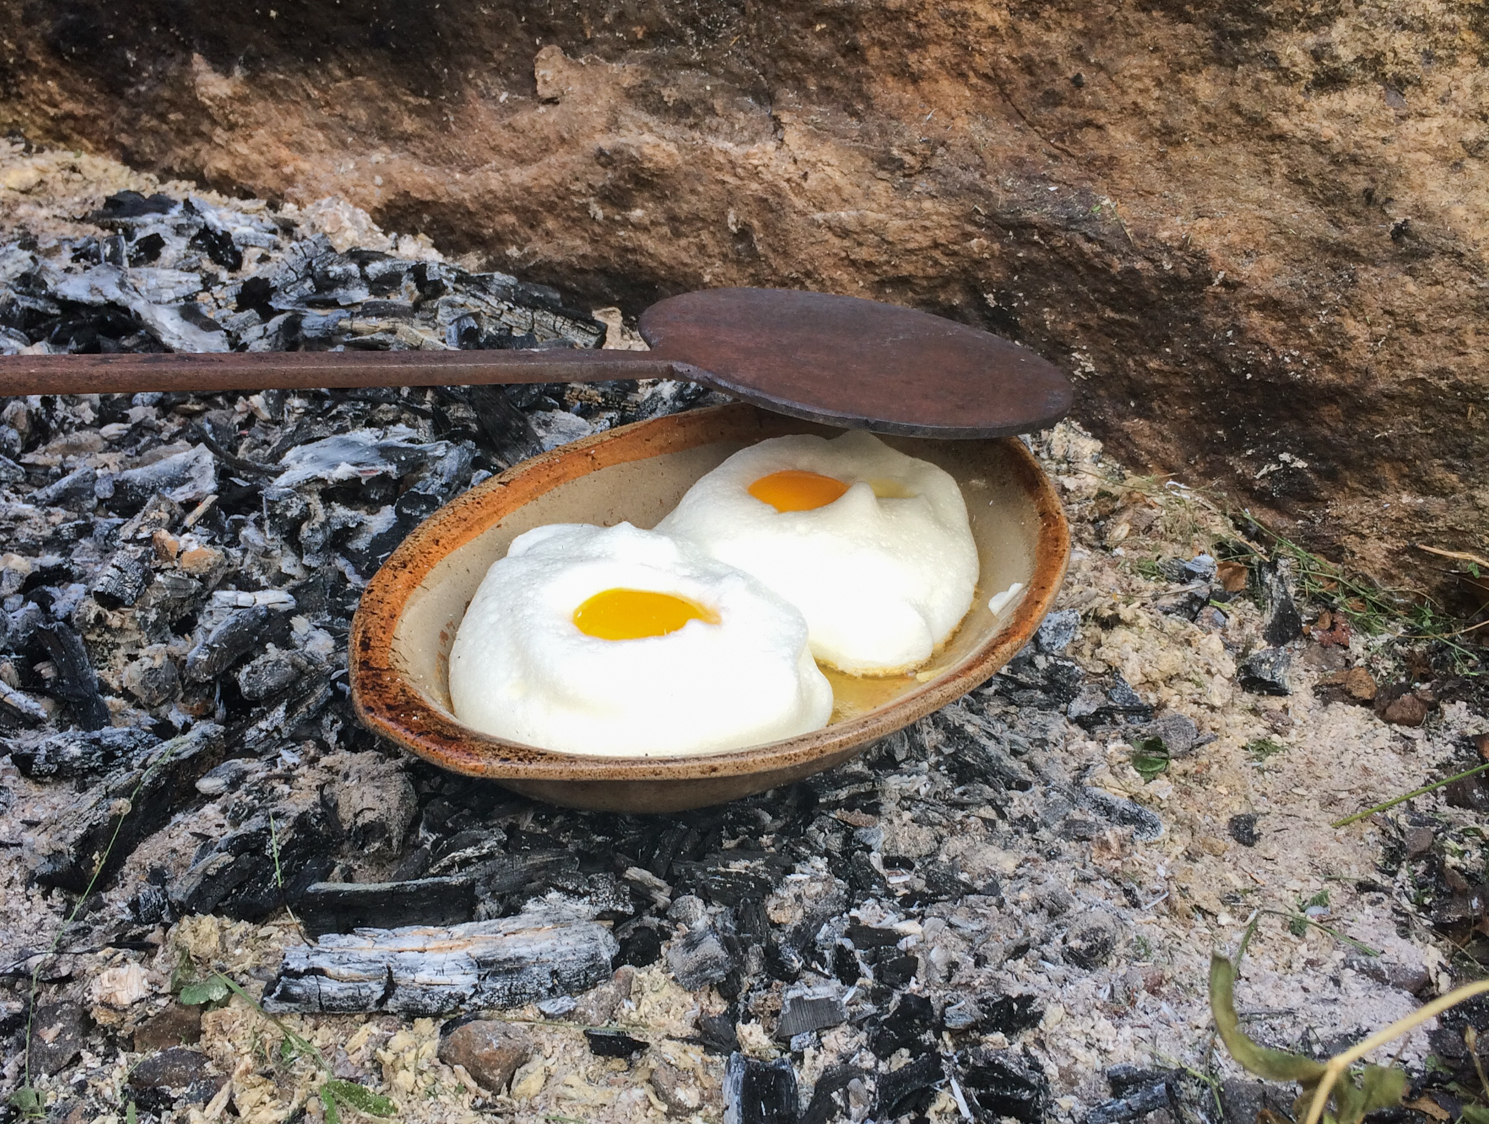 Food historian Paula Marcoux decided to follow the 1651 recipe for Eggs in Snow, using the period cooking tools it called for. Instead of an oven, she placed the eggs on a buttered dish over hot coals and heated it from above using a hot fire shovel called a salamander. The result was surprisingly delicious, she says — and yes, it was basically cloud eggs.